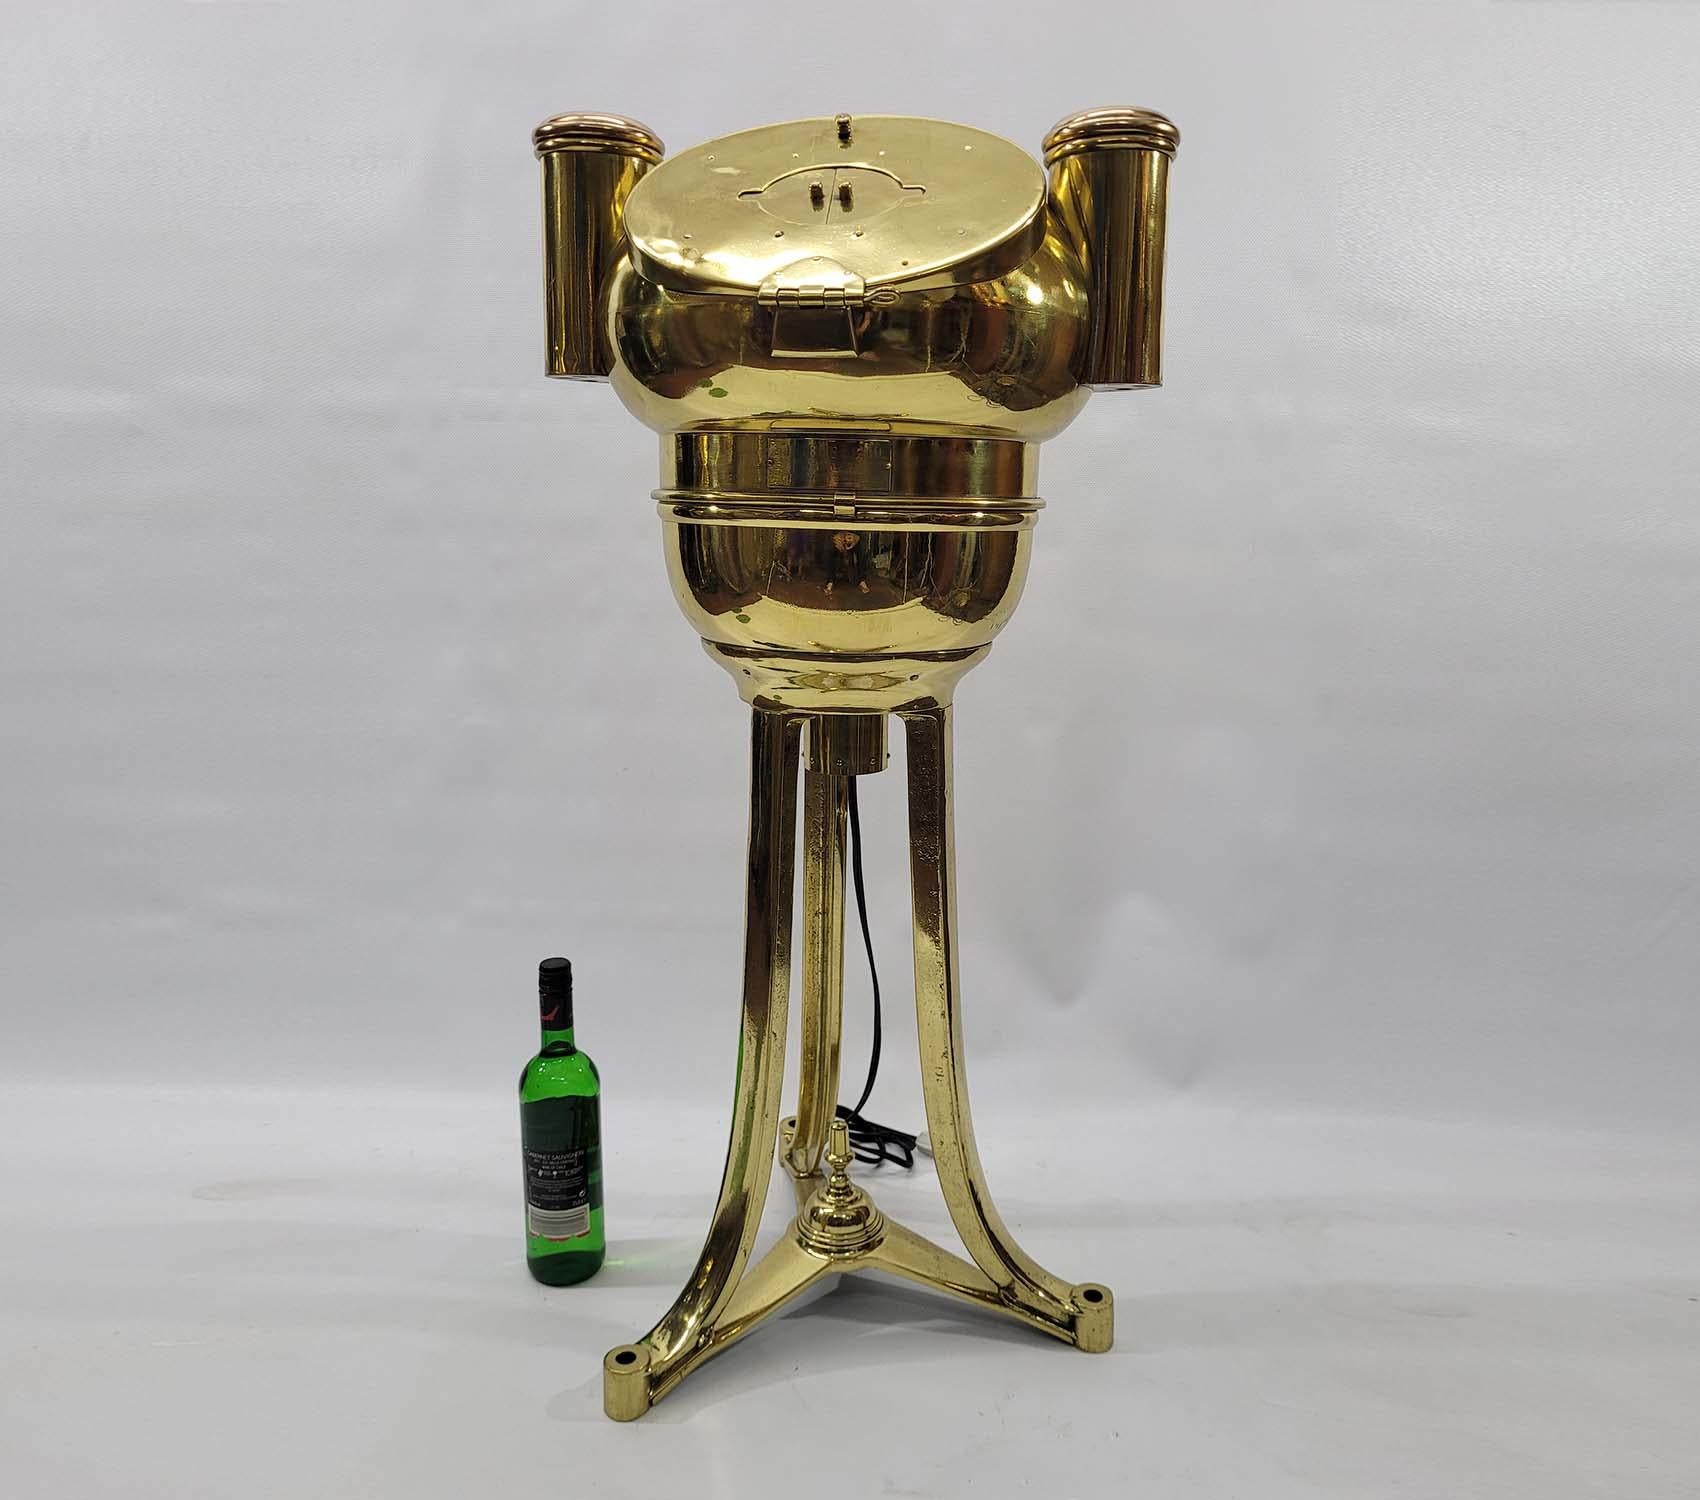 Early twentieth century ships binnacle with mushroom top, gimballed compass, three legged stand, etc. Meticulously polished and lacquered. Hinged door on the hood. Interior has been fitted with soft lighting. Circa 1920. Exceptional.

Weight:    48